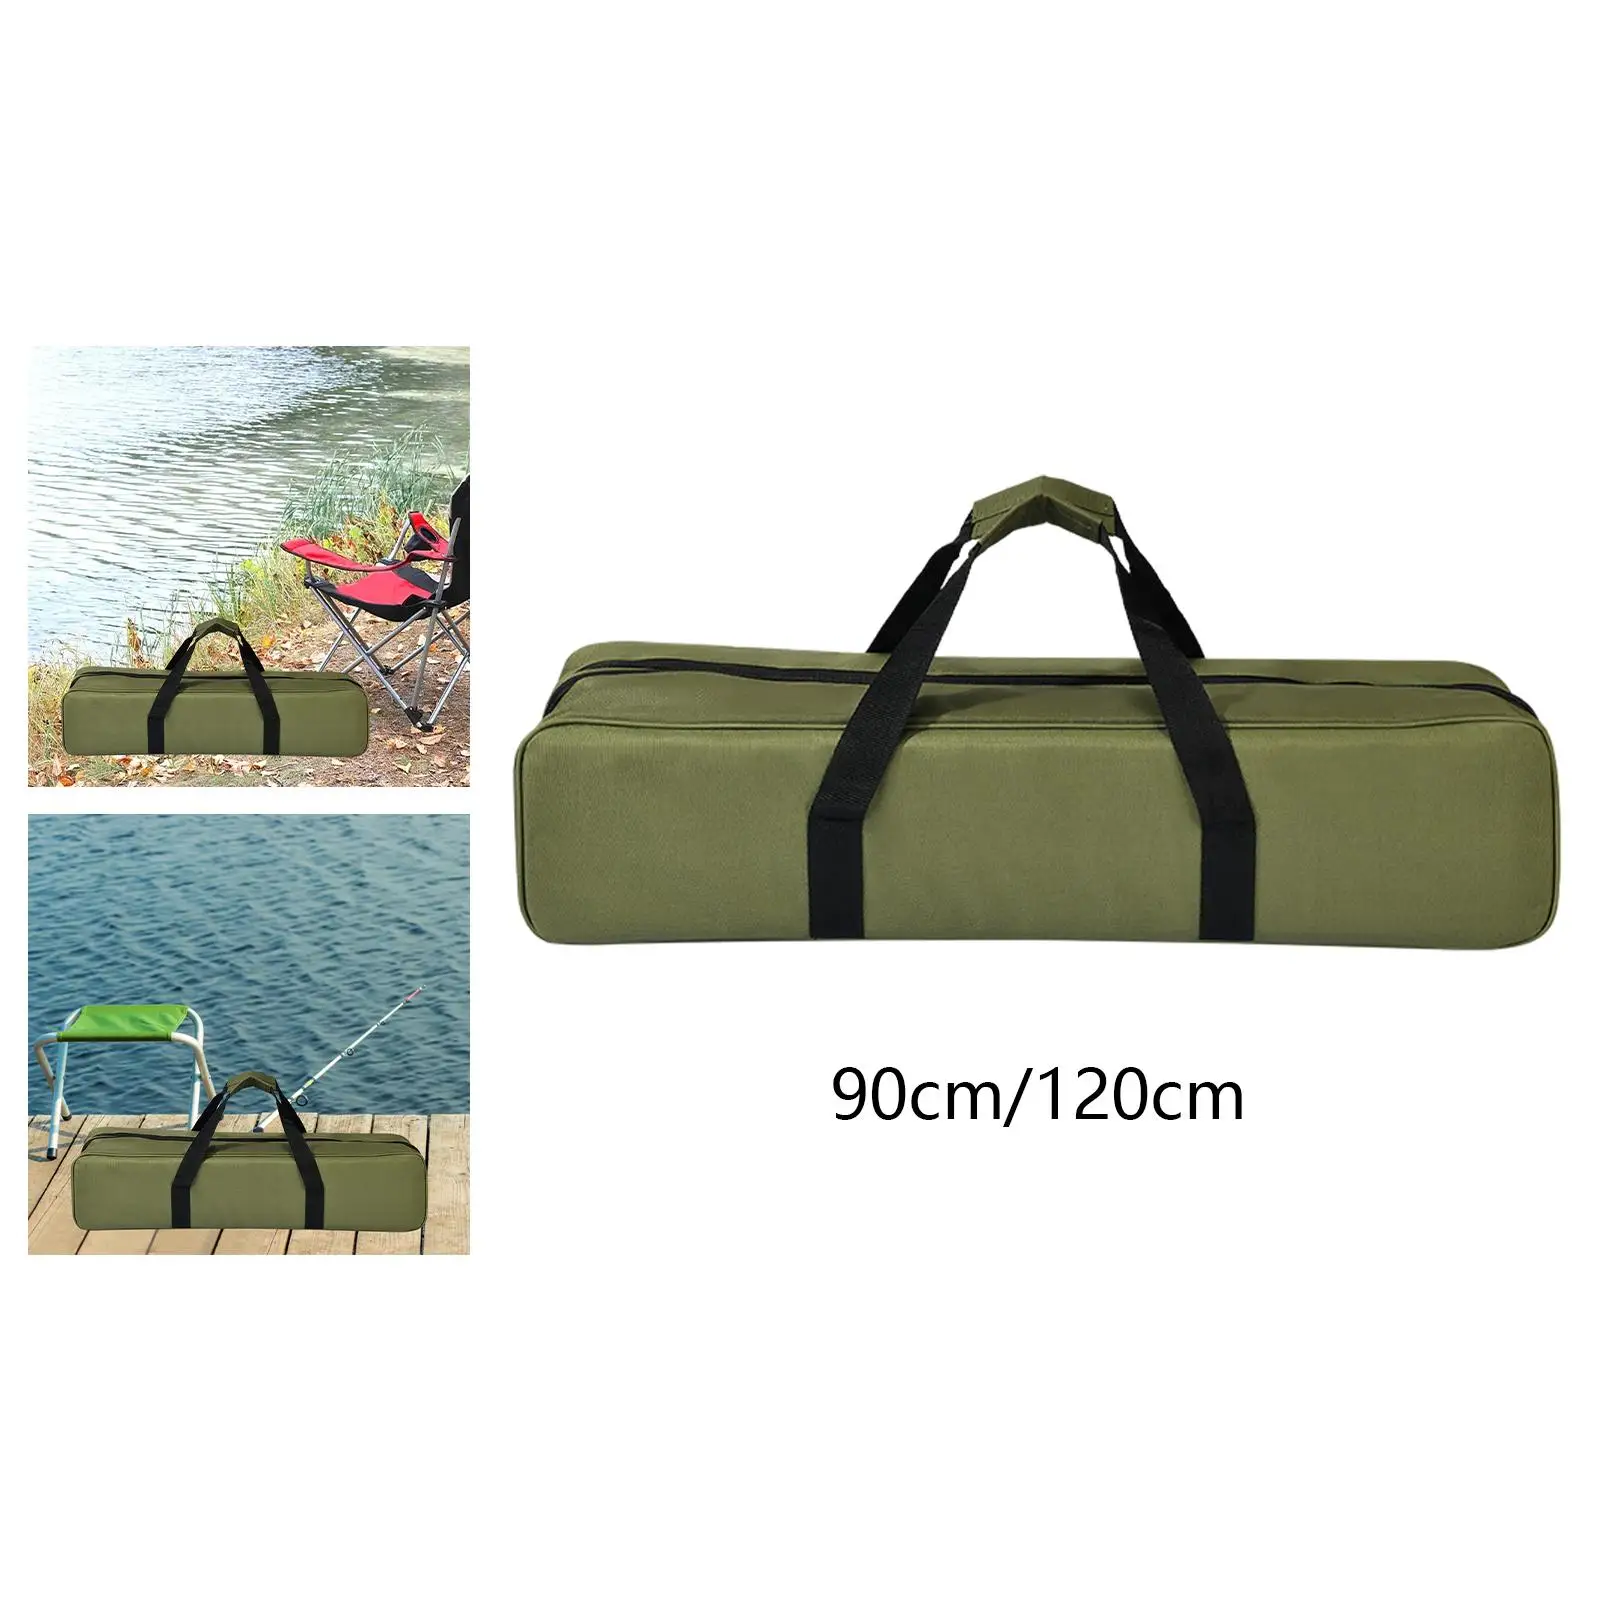 Camping Storage Bag Tent Accessories Camping Organizer Tent Pole Bag for Awning Light Stands Canopy Pole Tent Pole Fishing